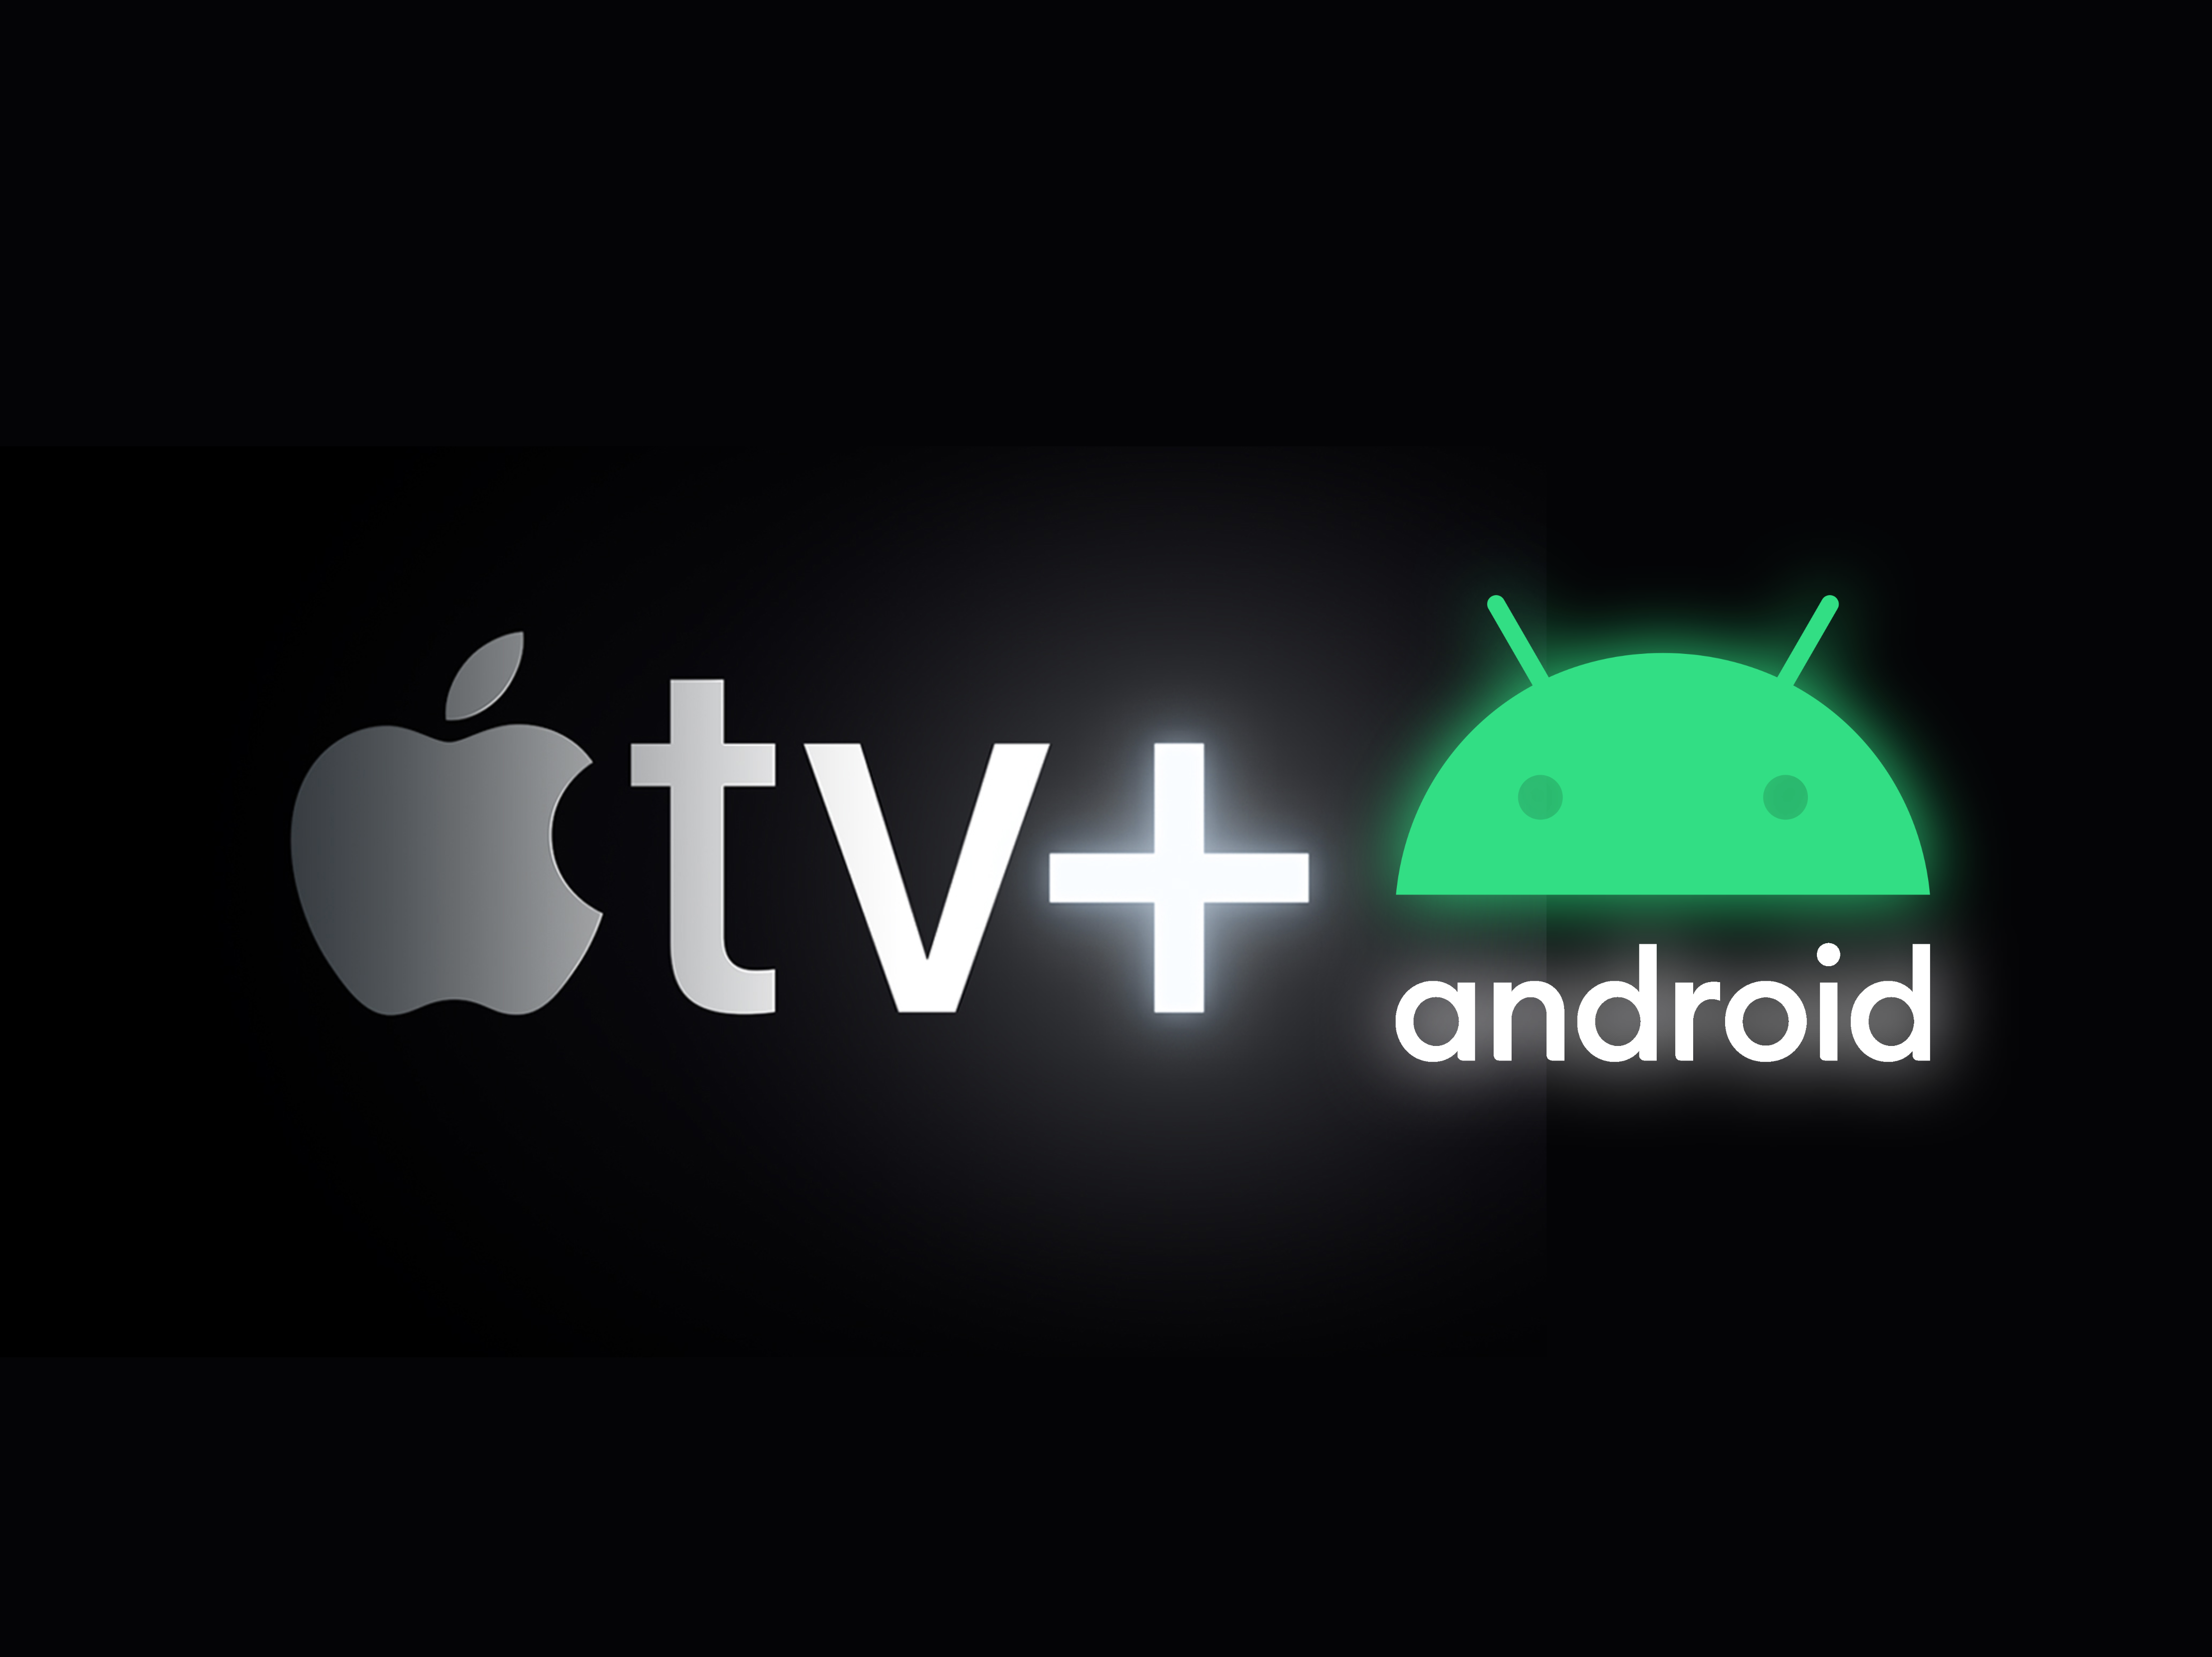 The Apple TV app is now available for Android TV devices